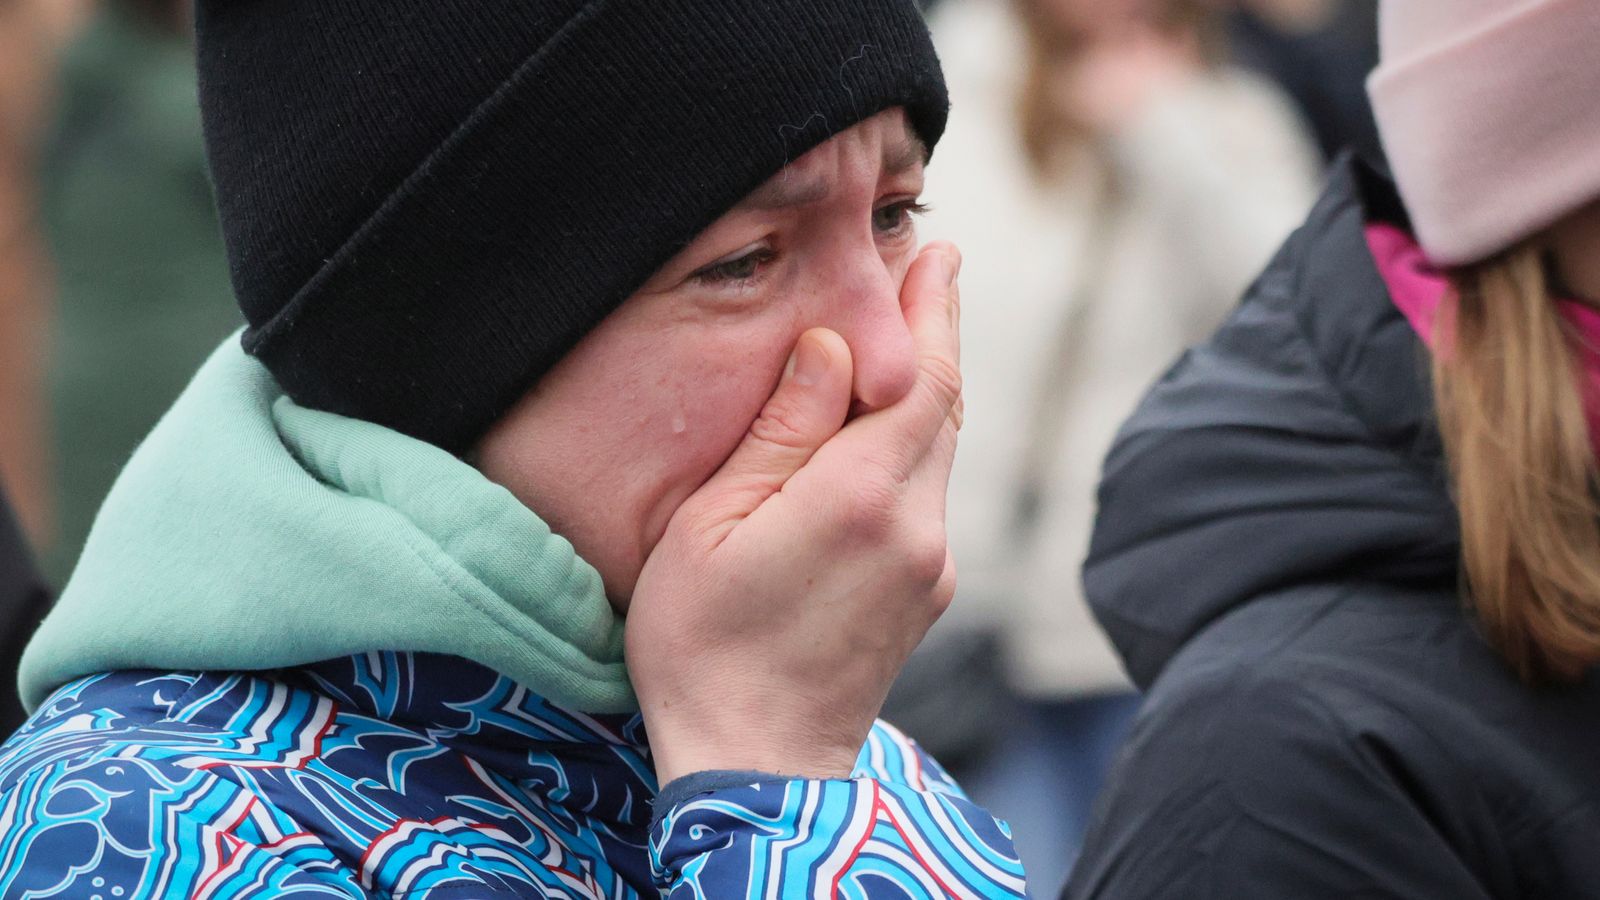 Russia mourns victims of deadly concert hall attack as families of missing face anxious wait